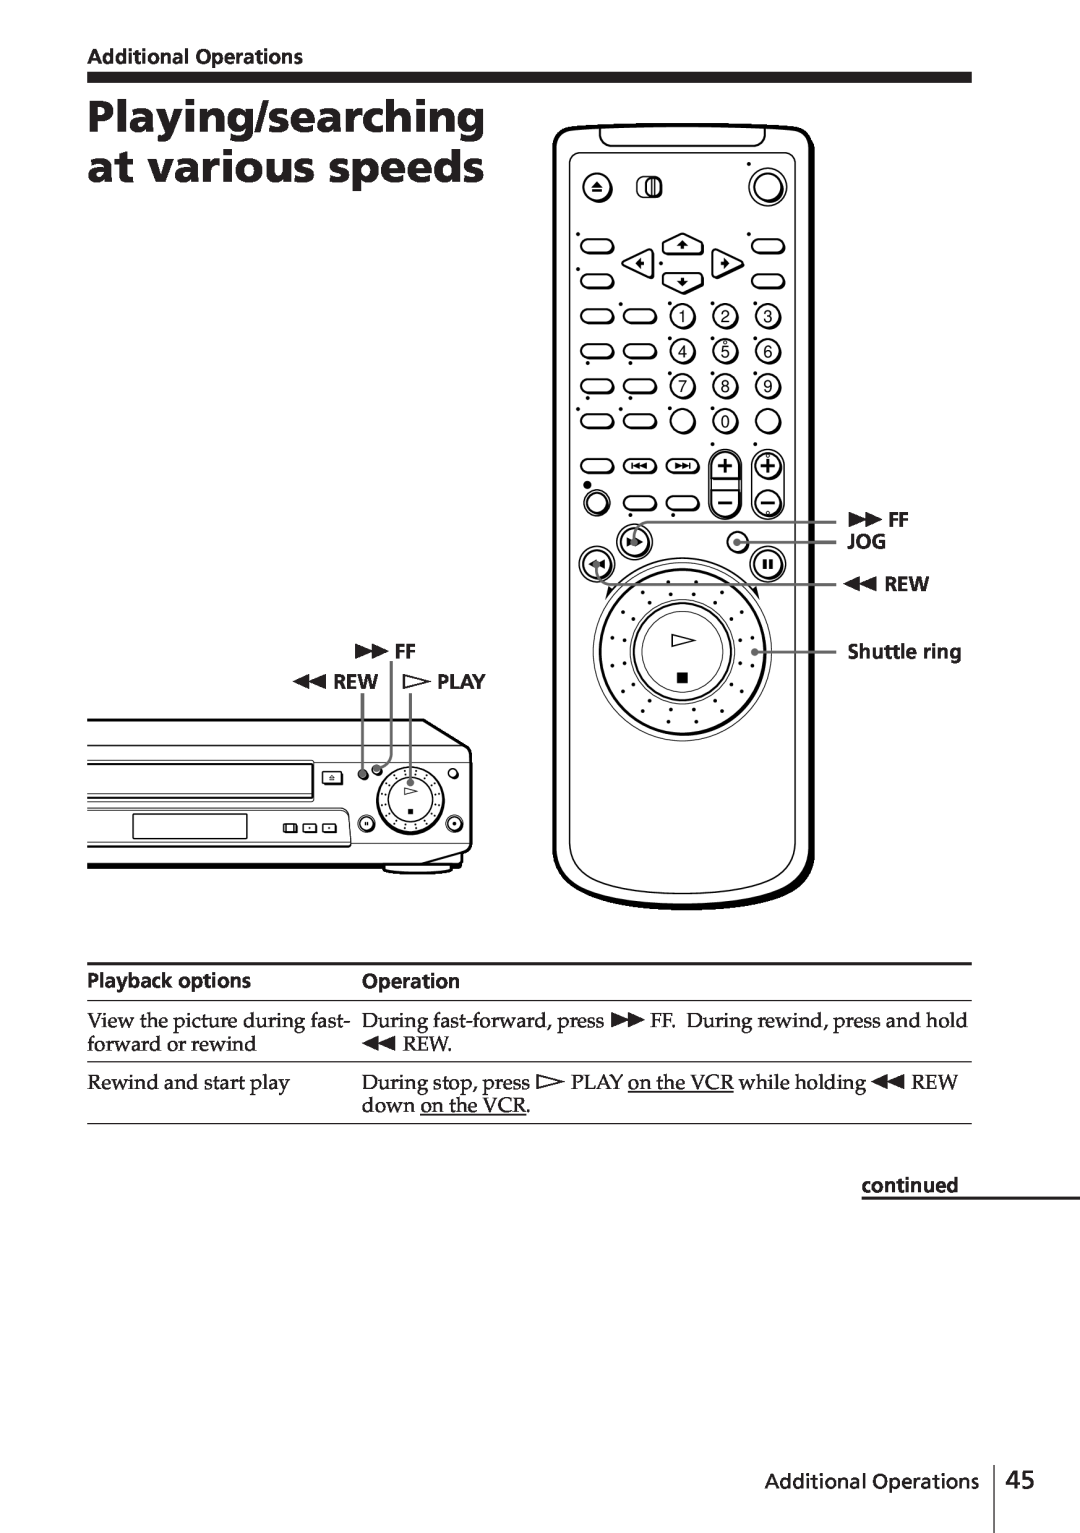 Sony SLV-E580EG manual Playing/searching at various speeds, Additional Operations, JOG 0 REW, REW á PLAY, Playback options 